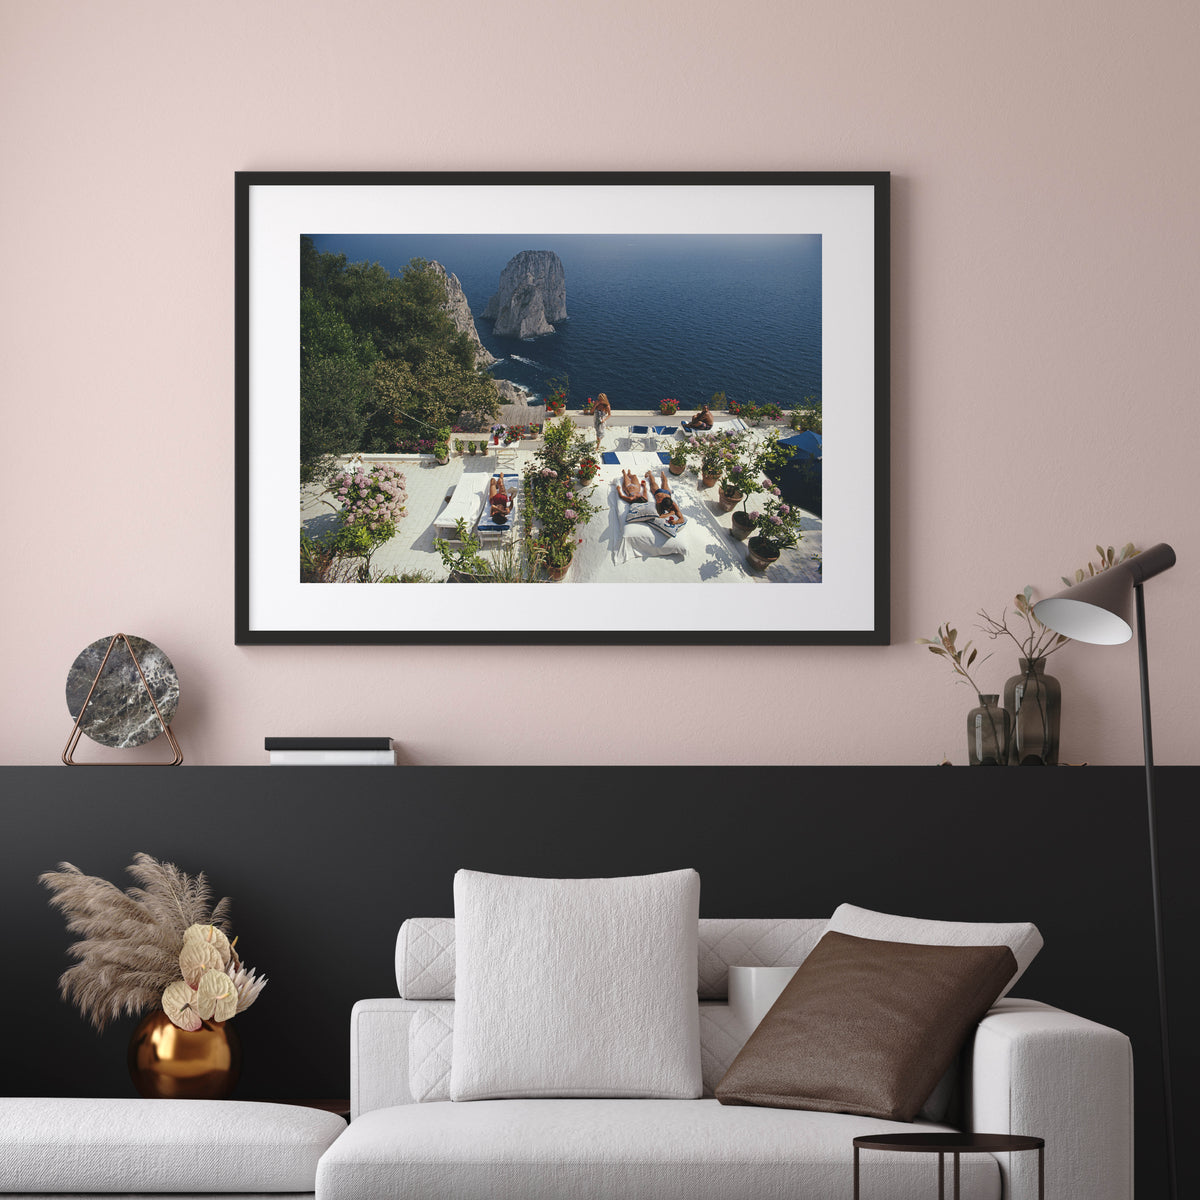 Framed Slim Aarons: Il Canille, Capri, Italy photo for sale Getty Images Gallery